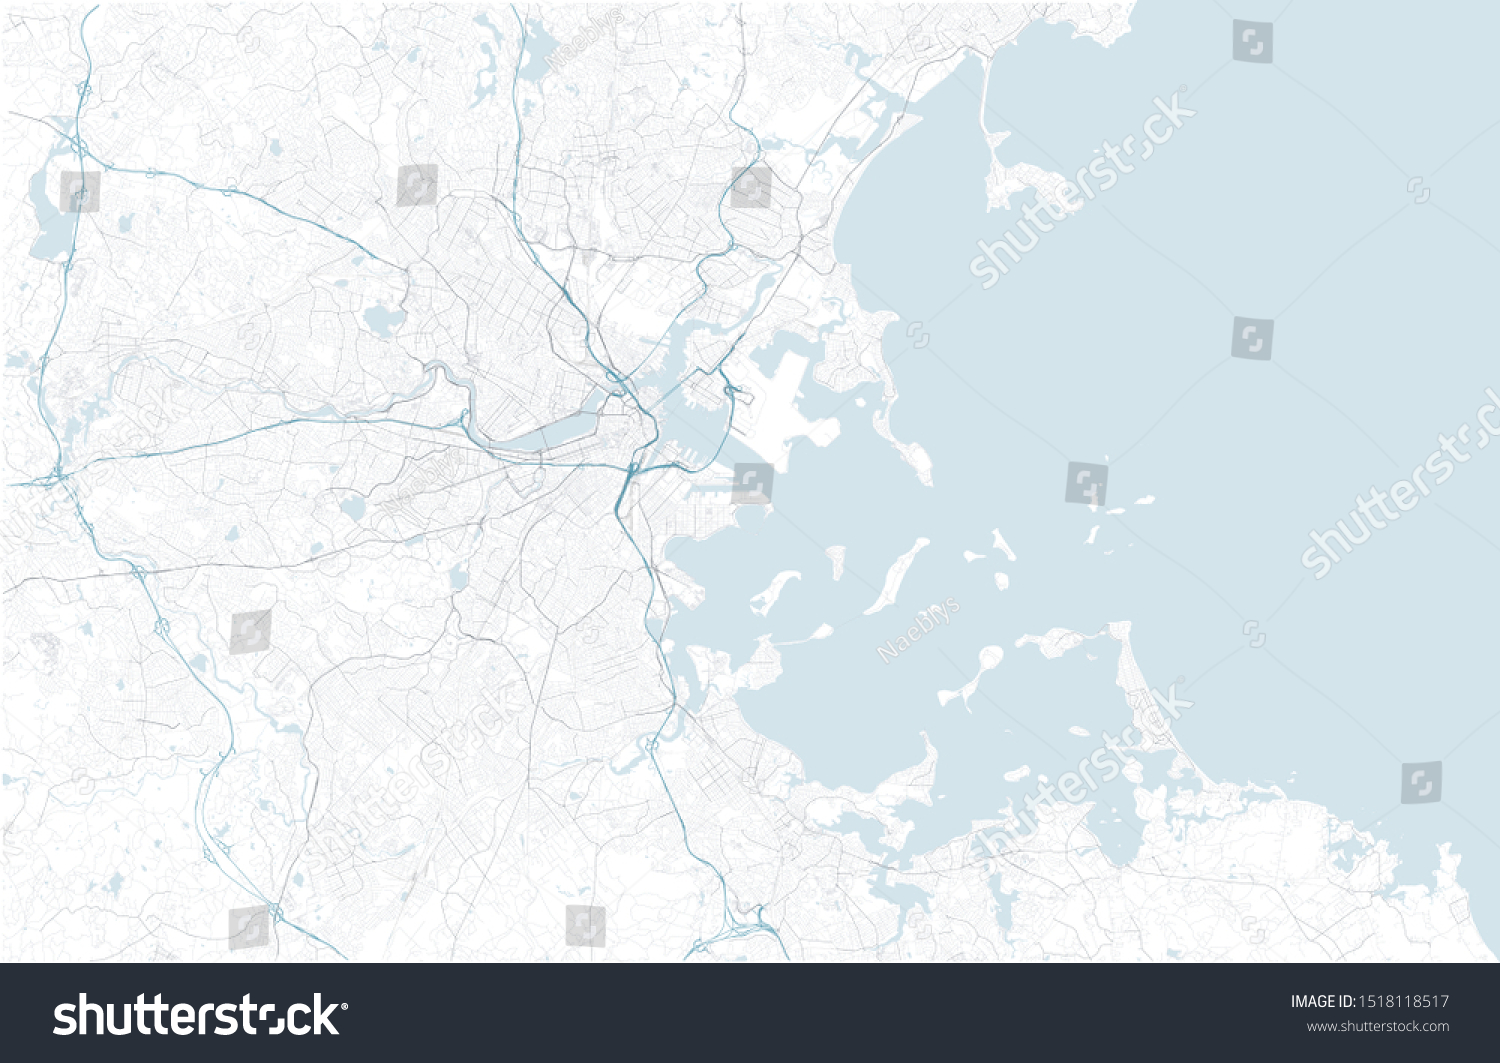 SVG of Satellite map of Boston and surrounding areas, Usa. Map roads, ring roads and highways, rivers, railway lines. Transportation map
 svg